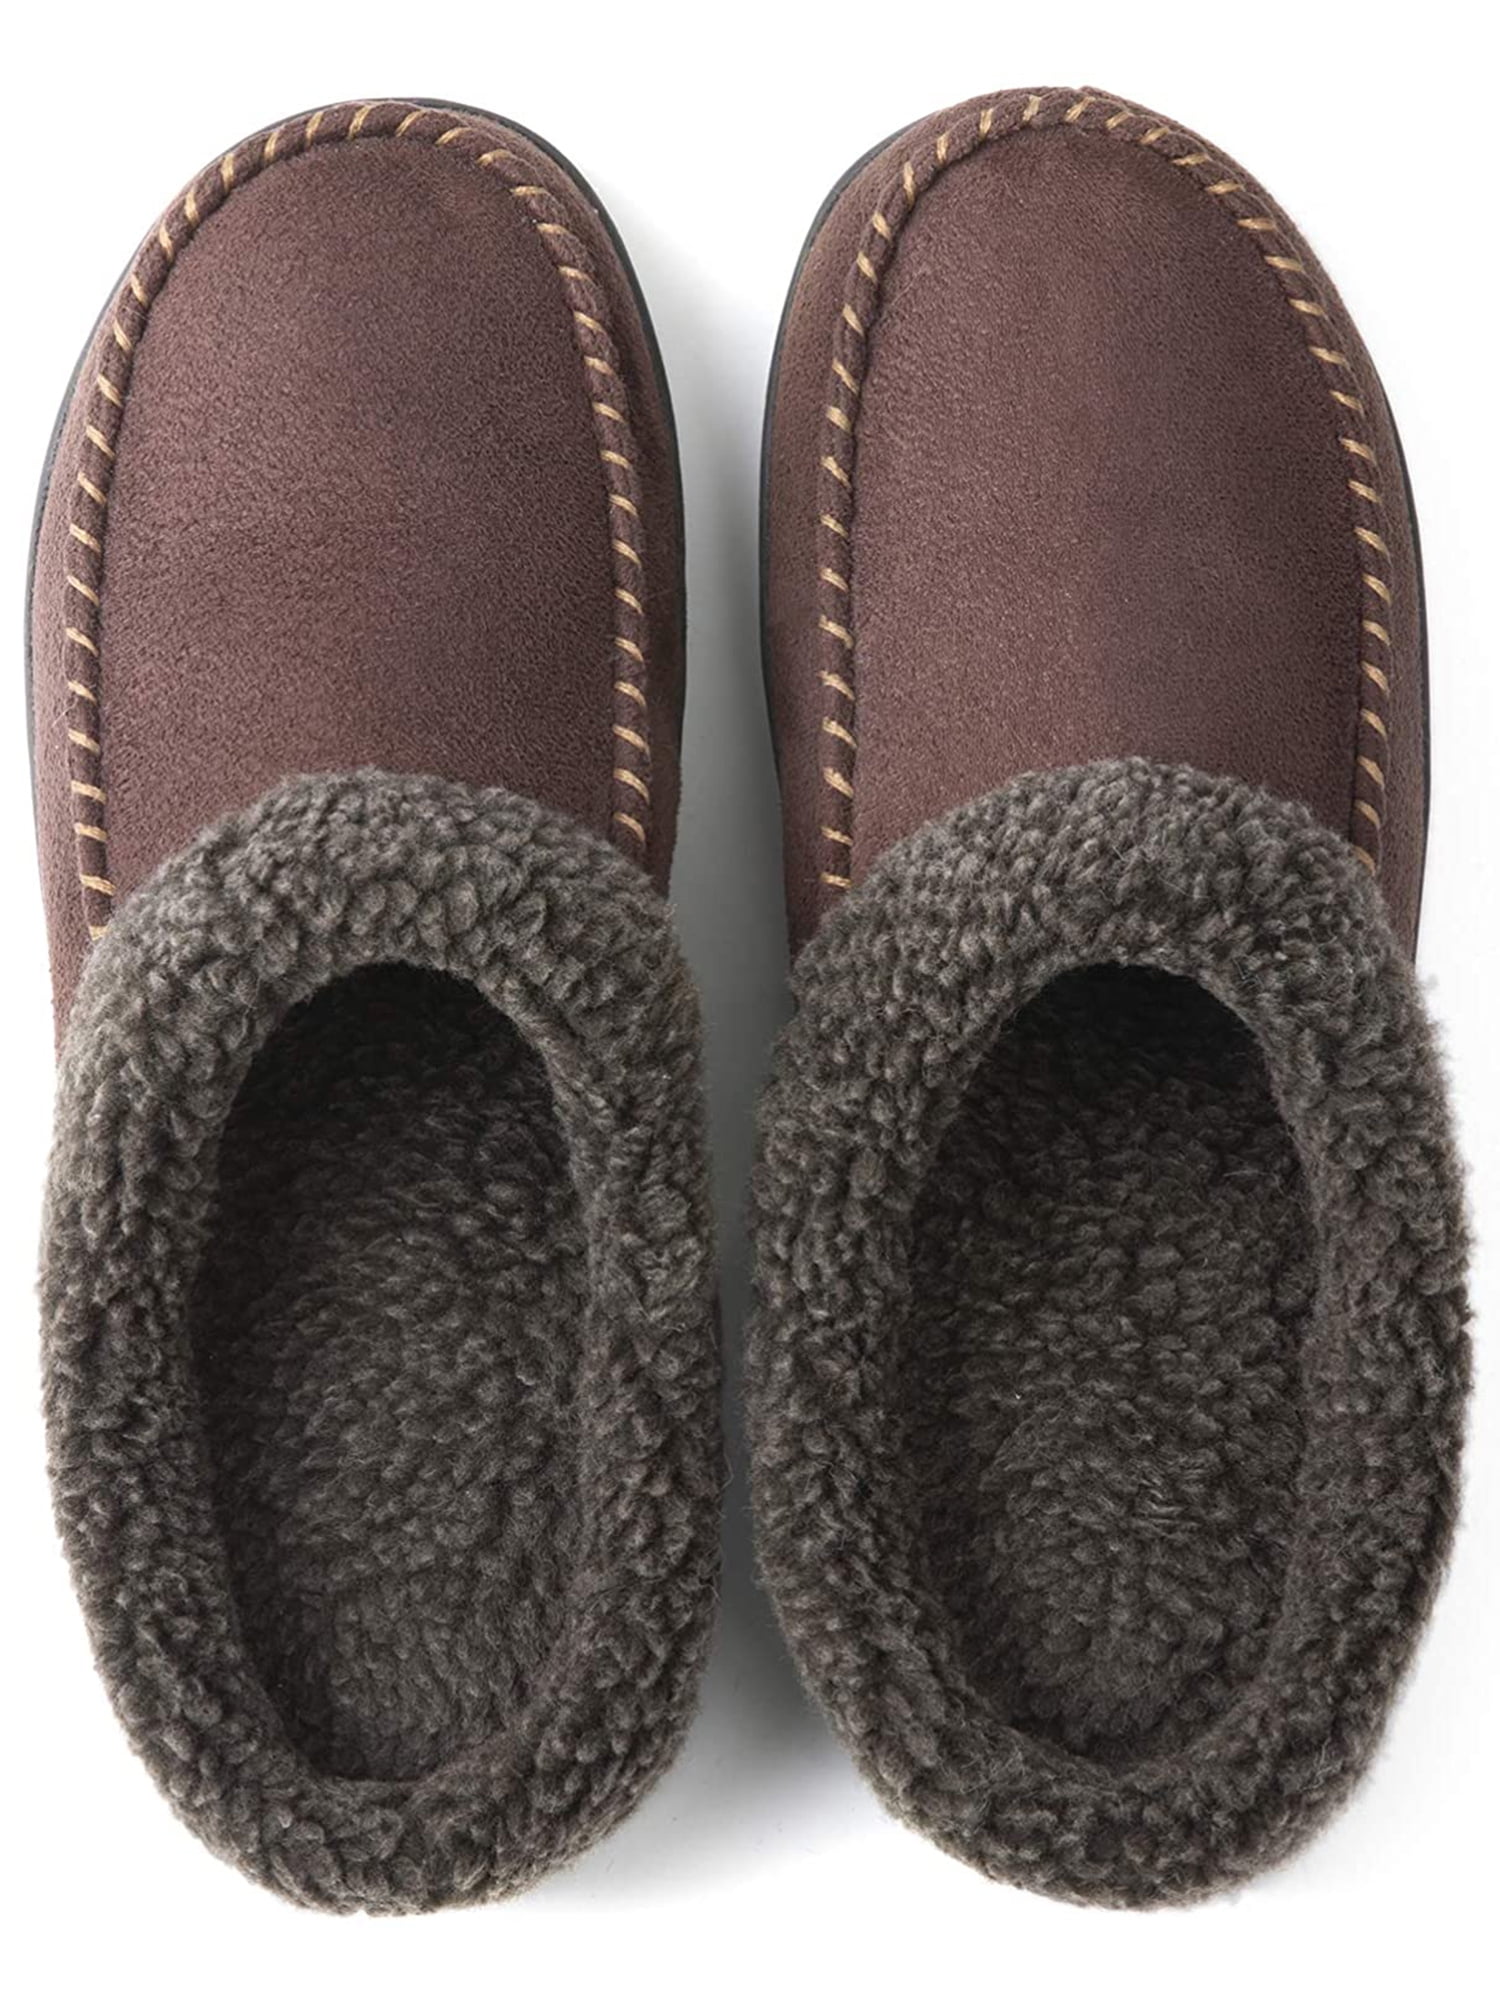 ONCAI Men’s-Memory-Foam-House-Slippers-Winter-Clog-Slipper Comfort Soft Cotton-Blend Slip-on Tweed Moccasin Indoor and Outdoor Anti-Skidding Plaid Mules Slippers for Men with Arch Support 